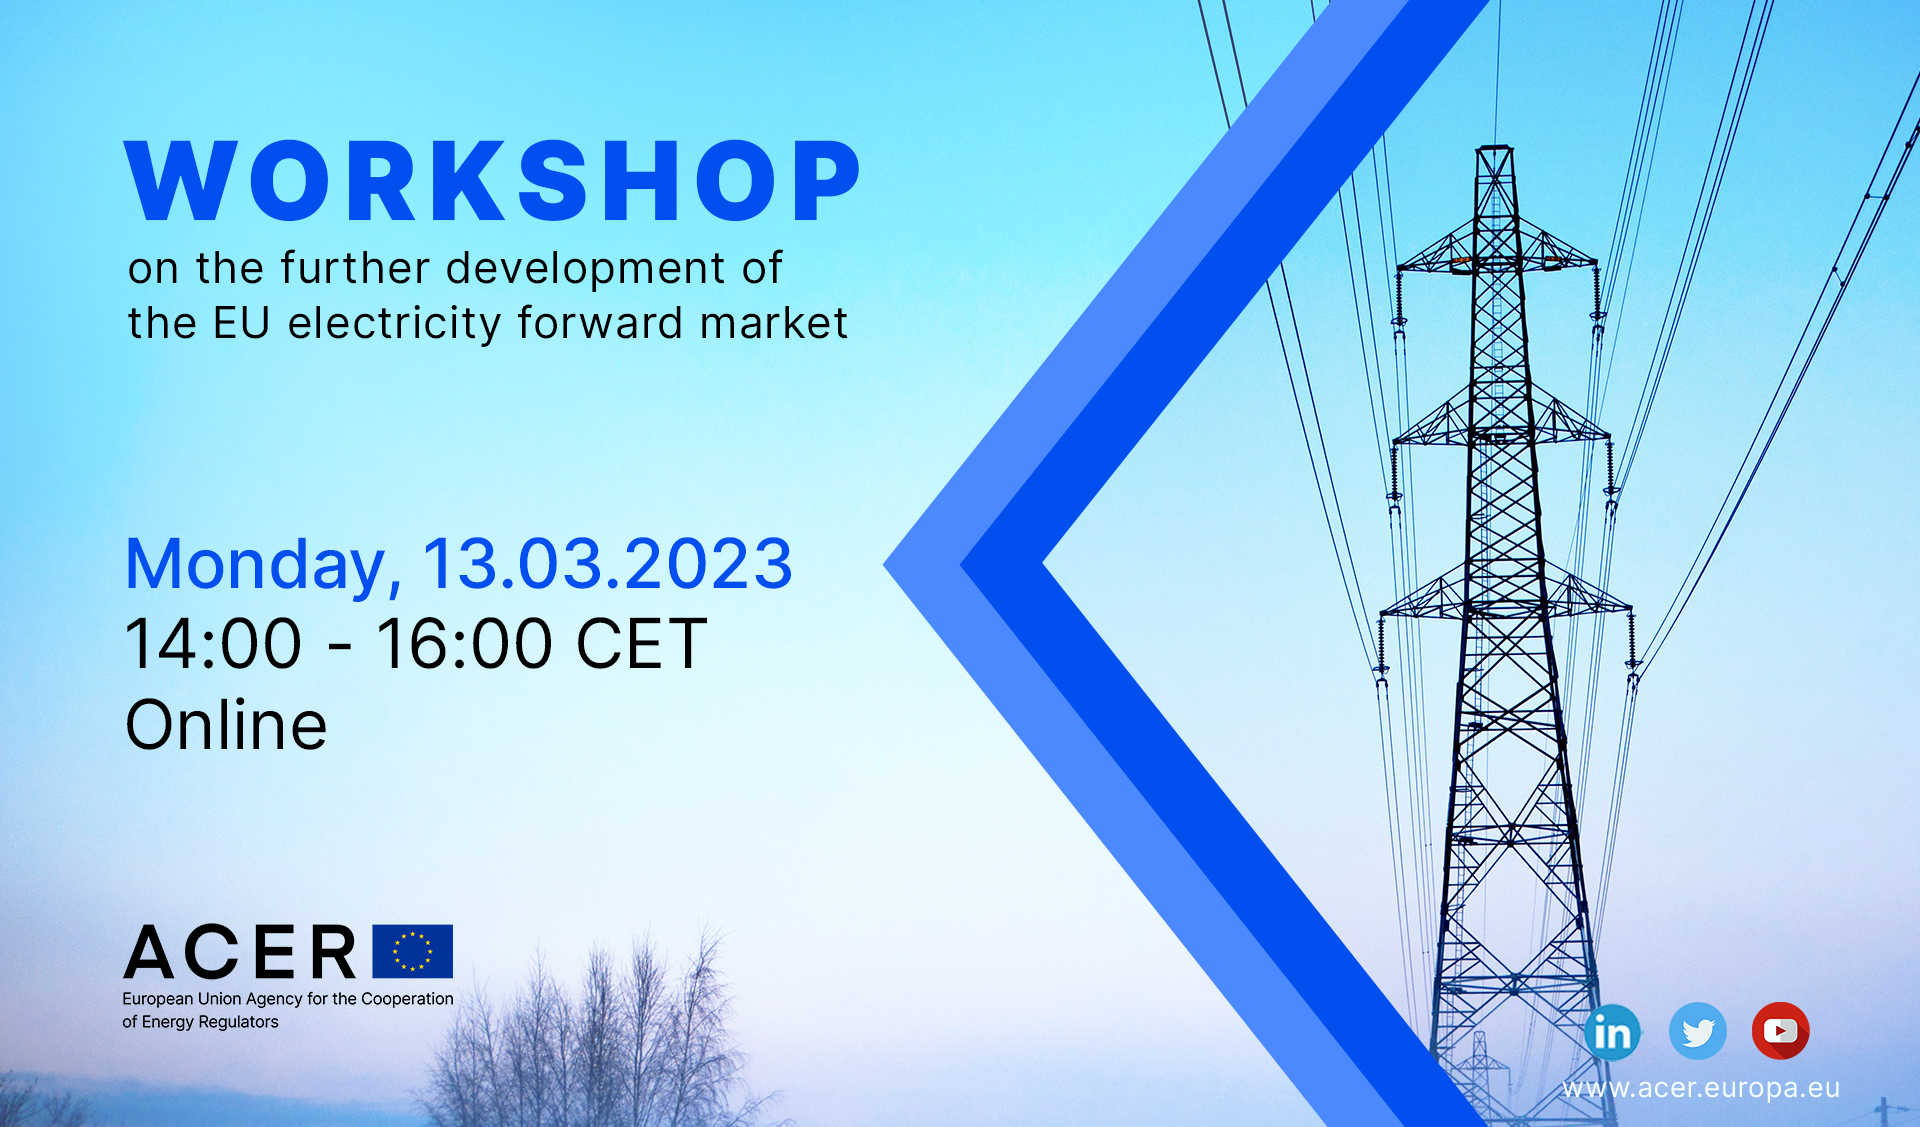 ACER workshop on the further development of the EU electricity forward market